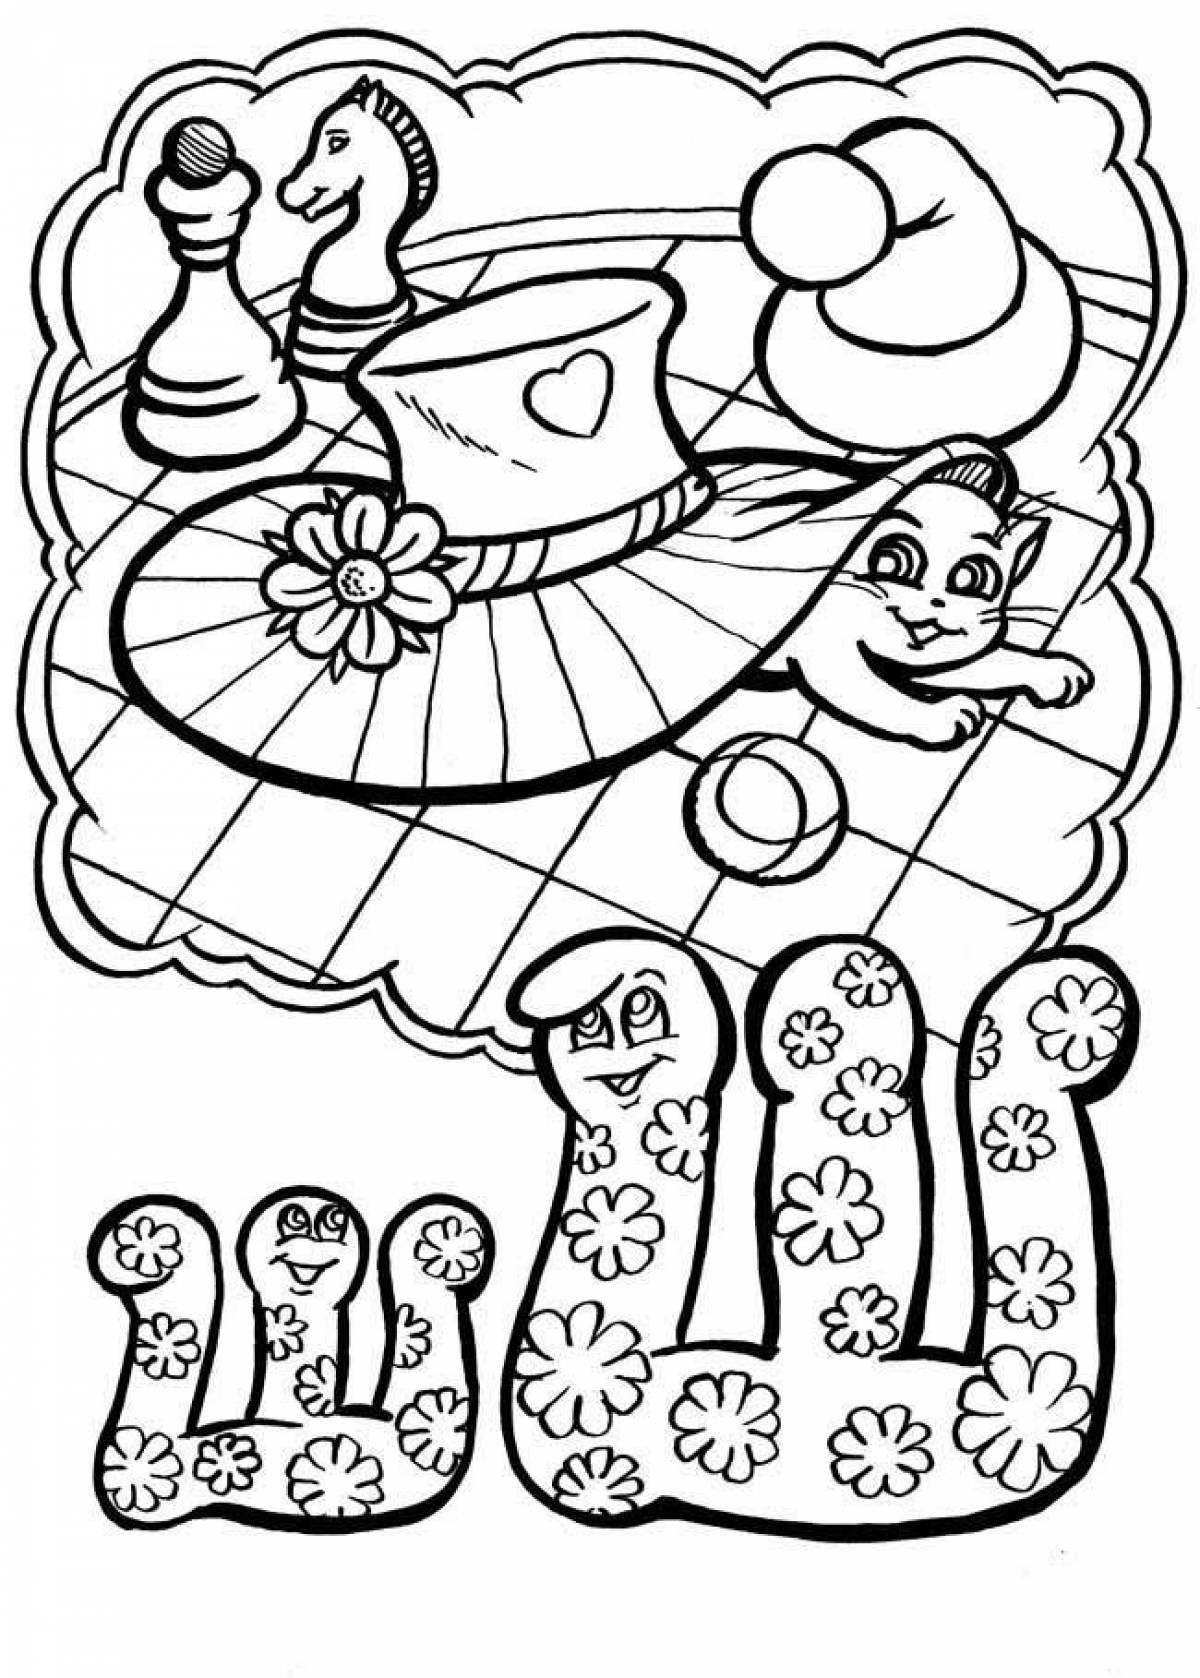 ABC in pictures coloring page